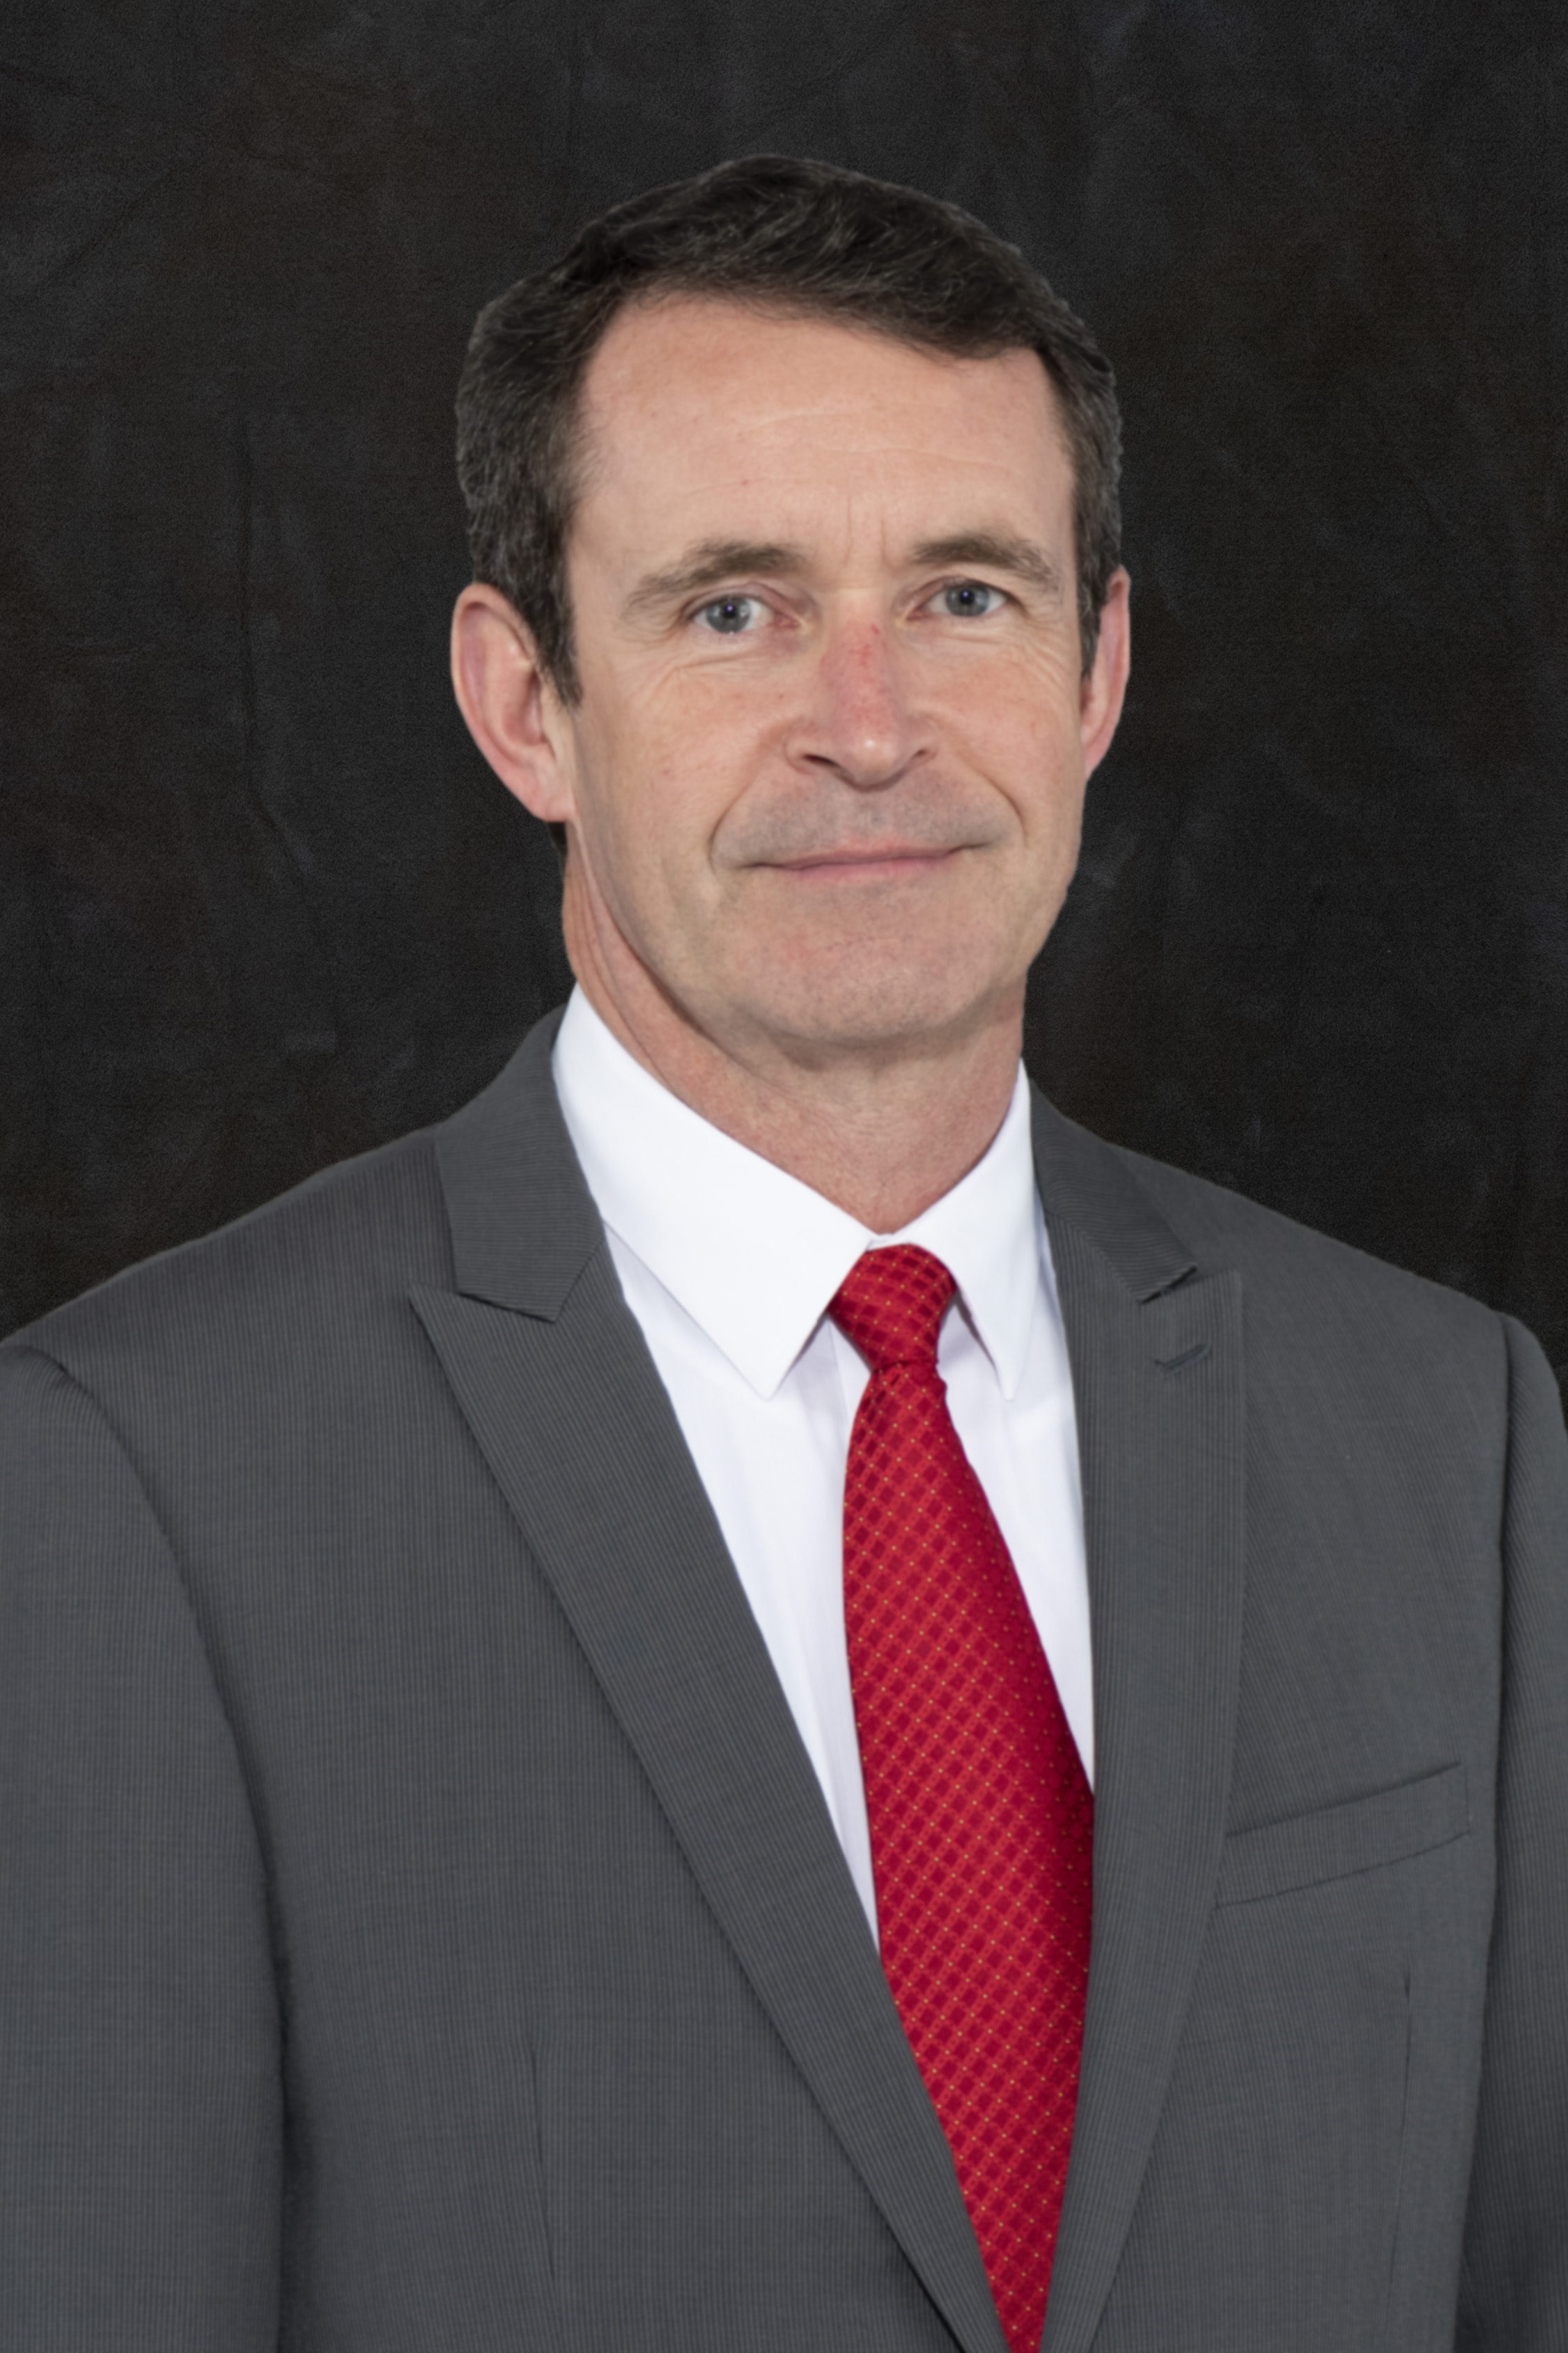 A headshot of Michael Field wearing a gray suit and a red tie.